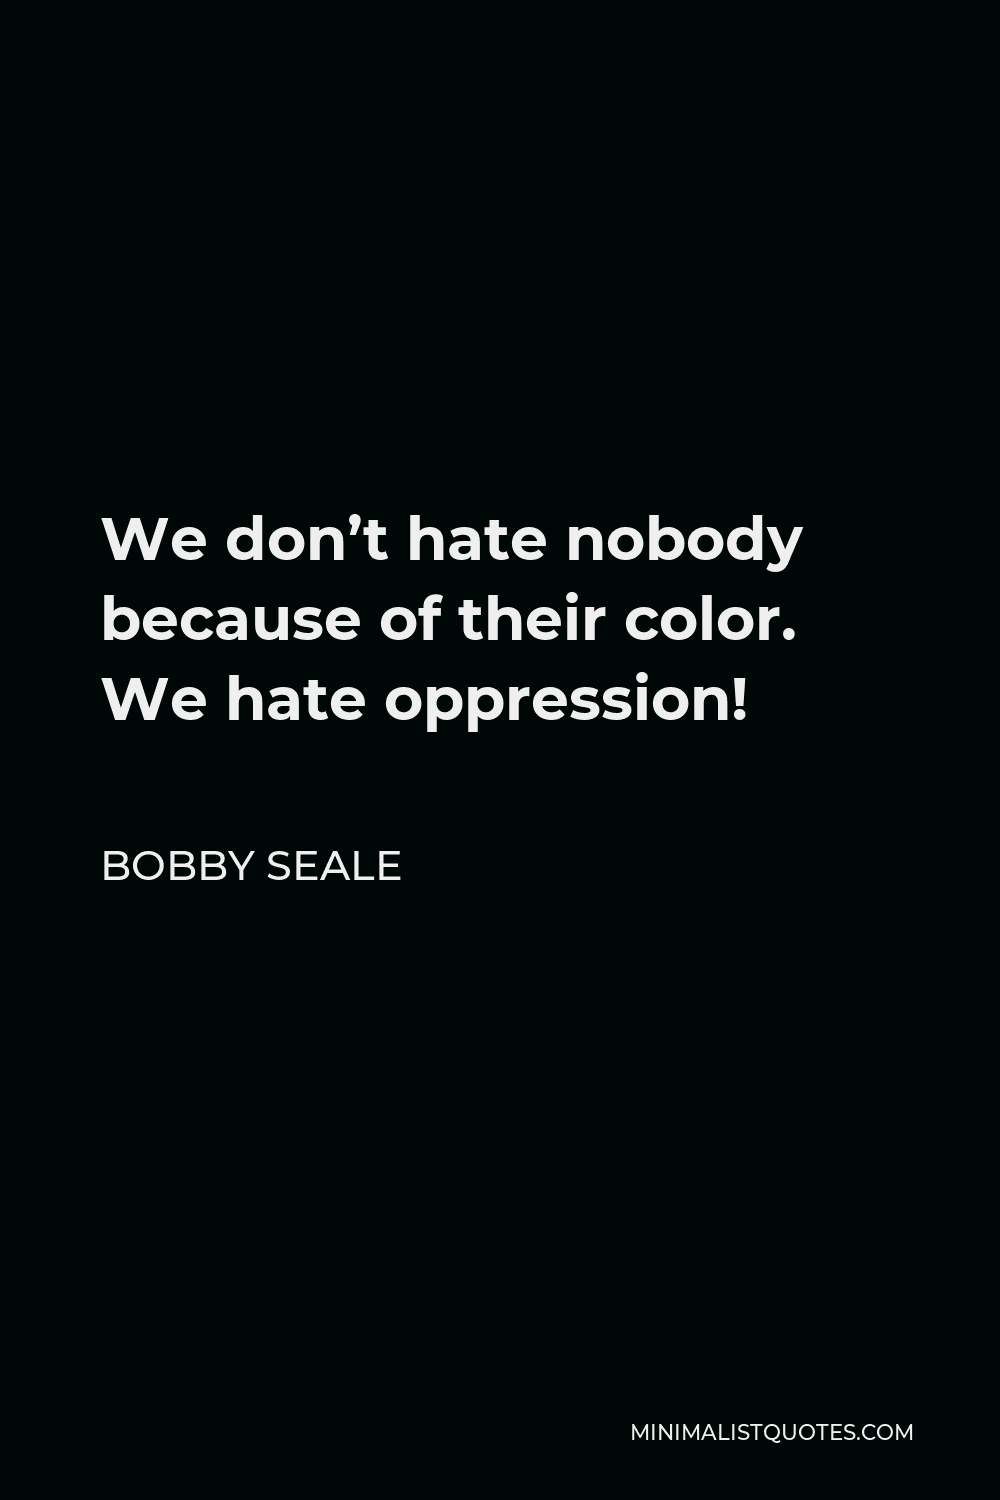 Bobby Seale Quote - We don’t hate nobody because of their color. We hate oppression!